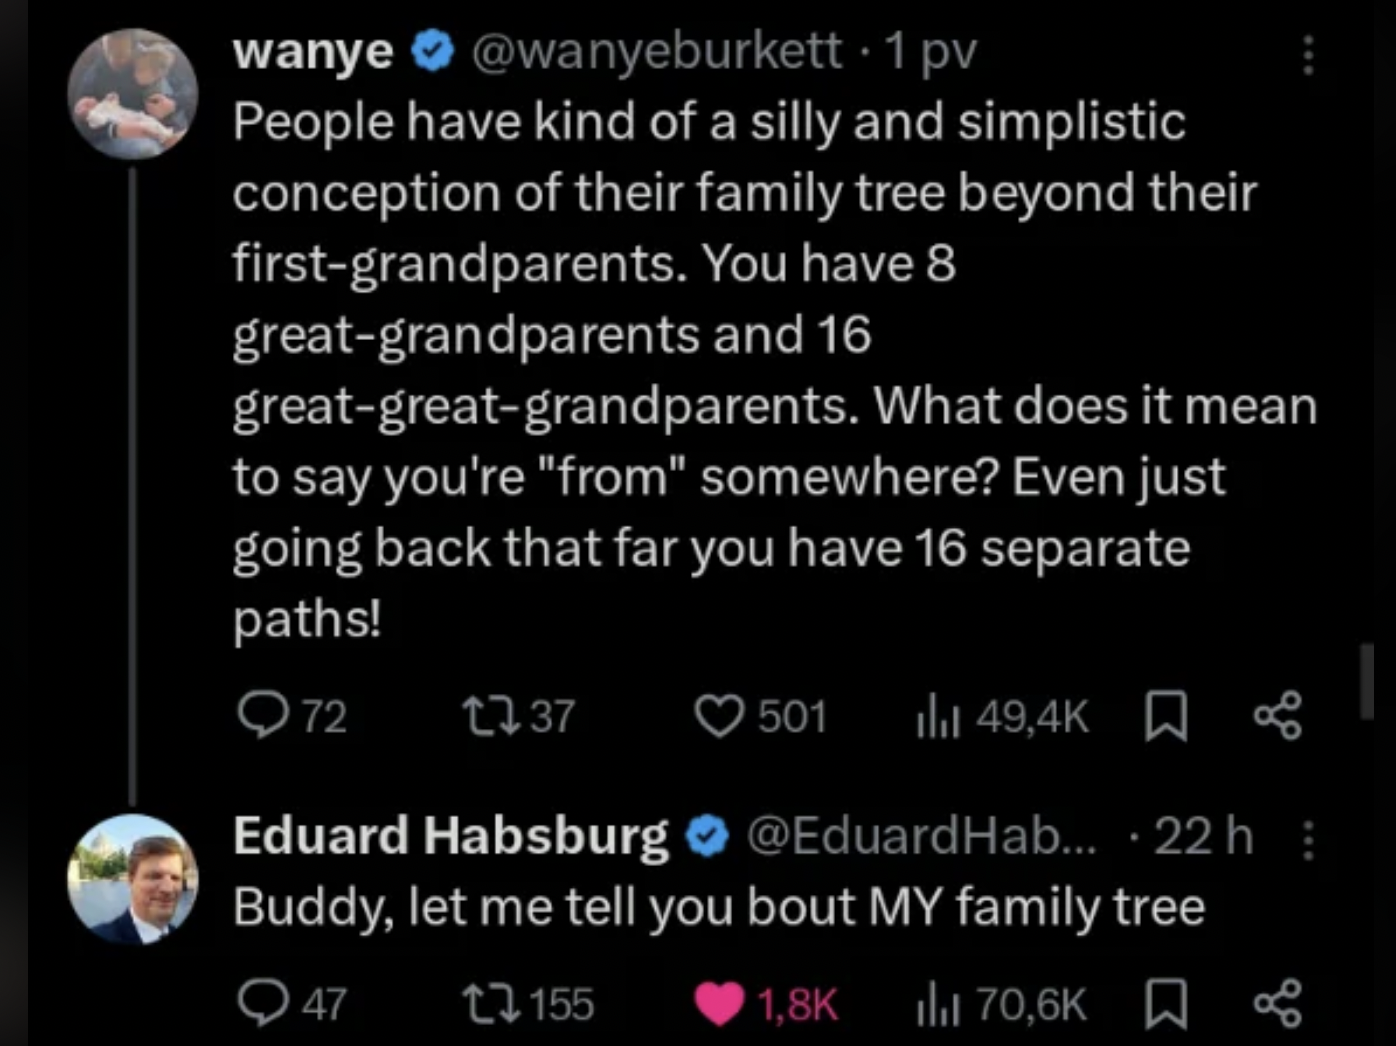 screenshot - wanye. 1 pv People have kind of a silly and simplistic conception of their family tree beyond their firstgrandparents. You have 8 greatgrandparents and 16 greatgreatgrandparents. What does it mean to say you're "from" somewhere? Even just goi